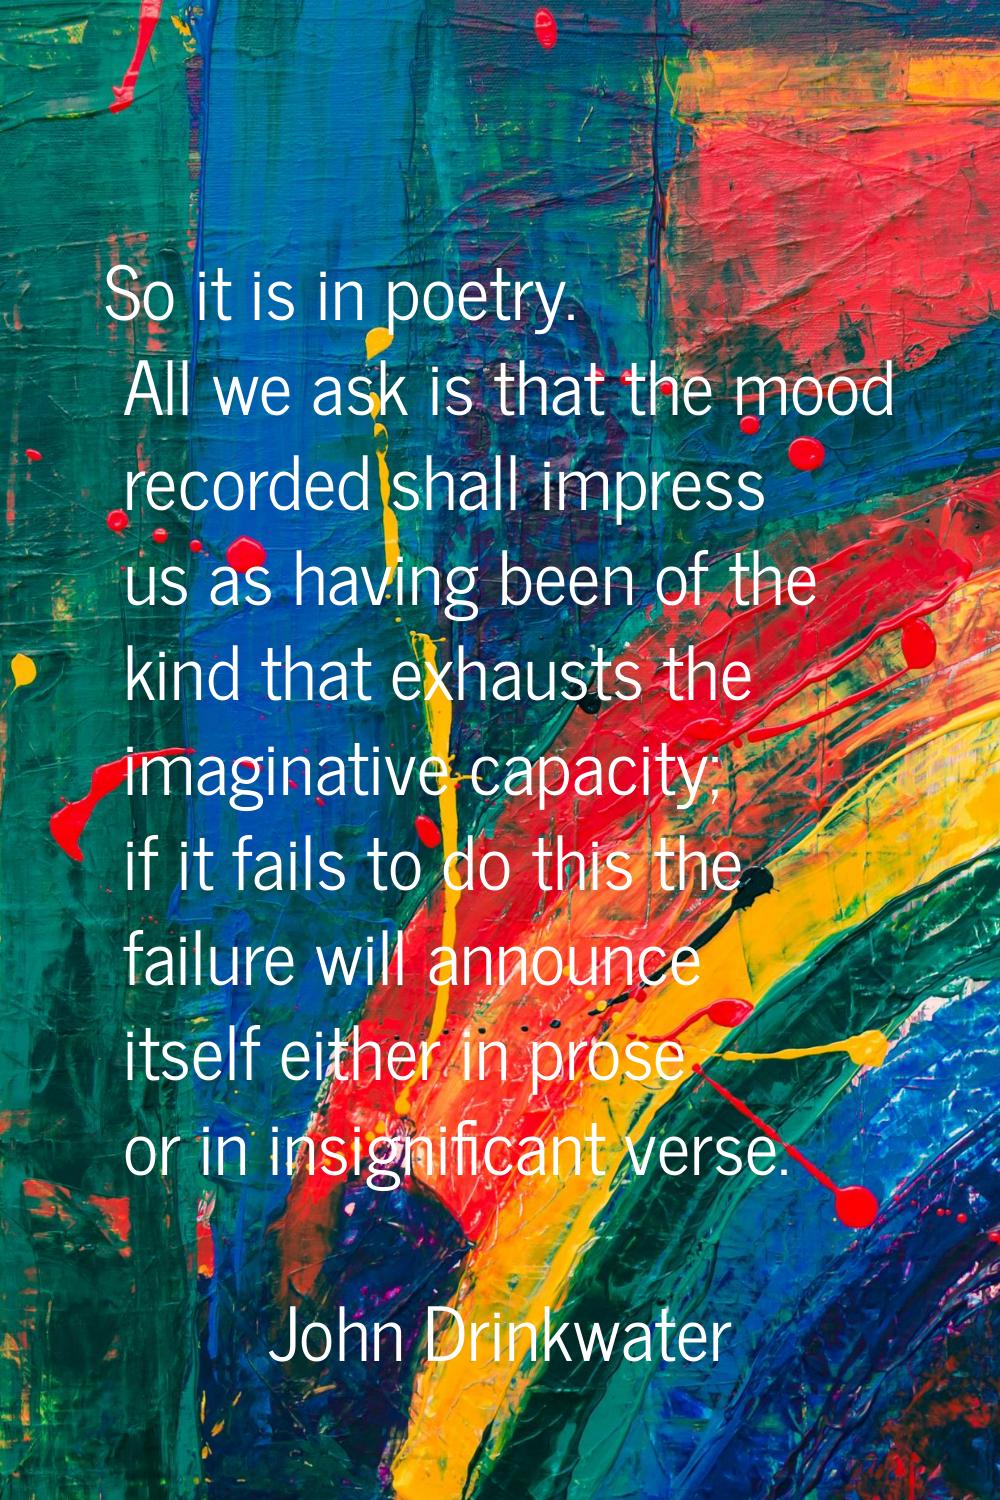 So it is in poetry. All we ask is that the mood recorded shall impress us as having been of the kin